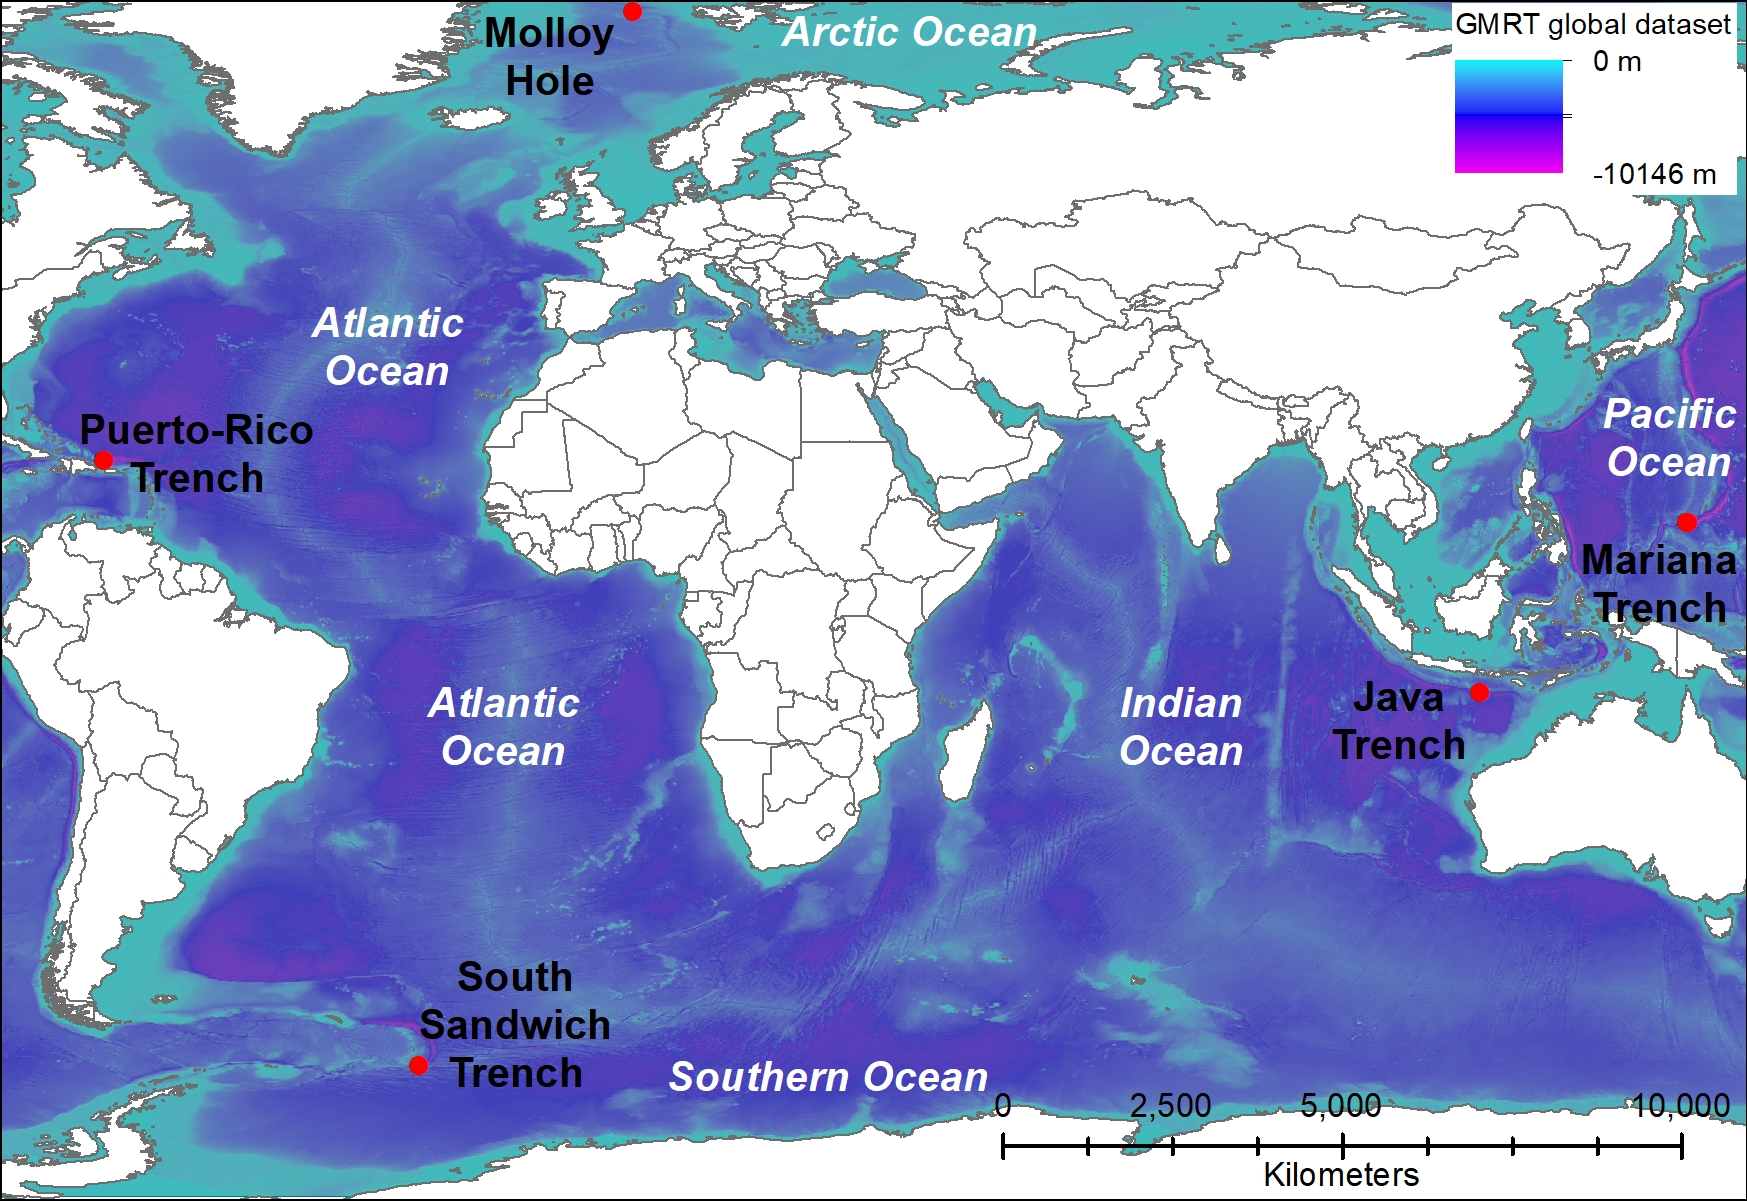 deep ocean trenches map